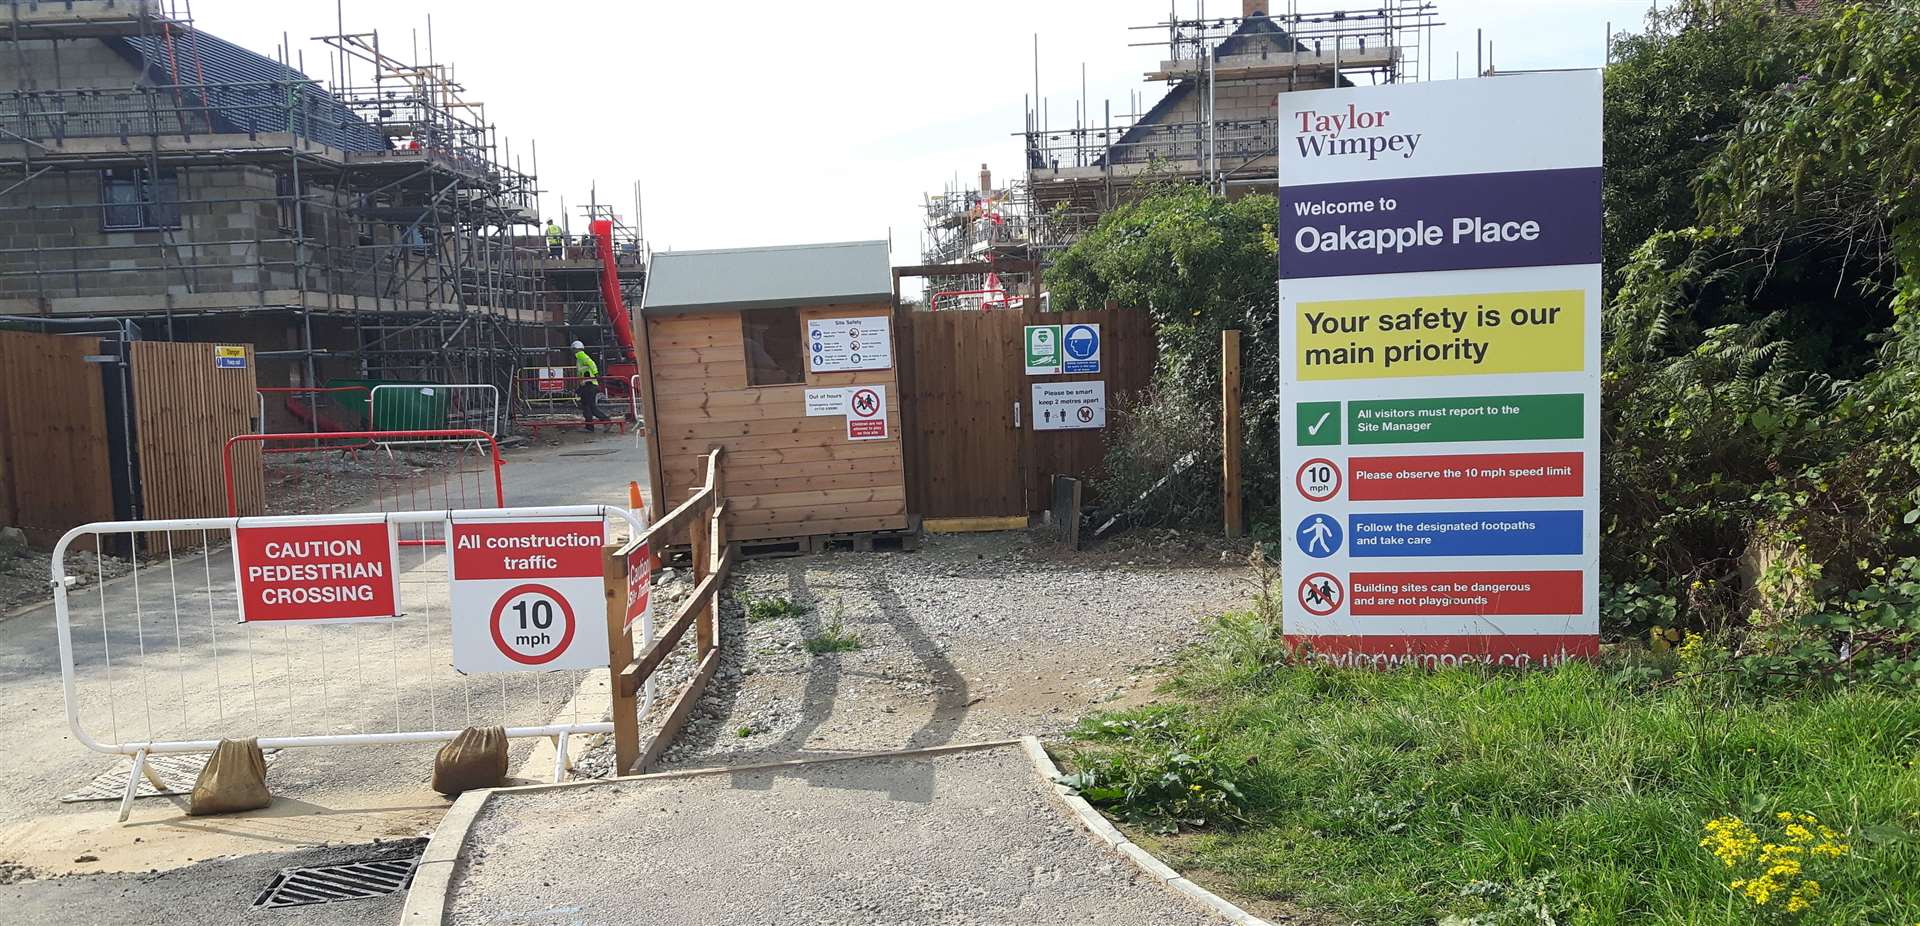 The Oakapple Place development is currently under construction in Barming